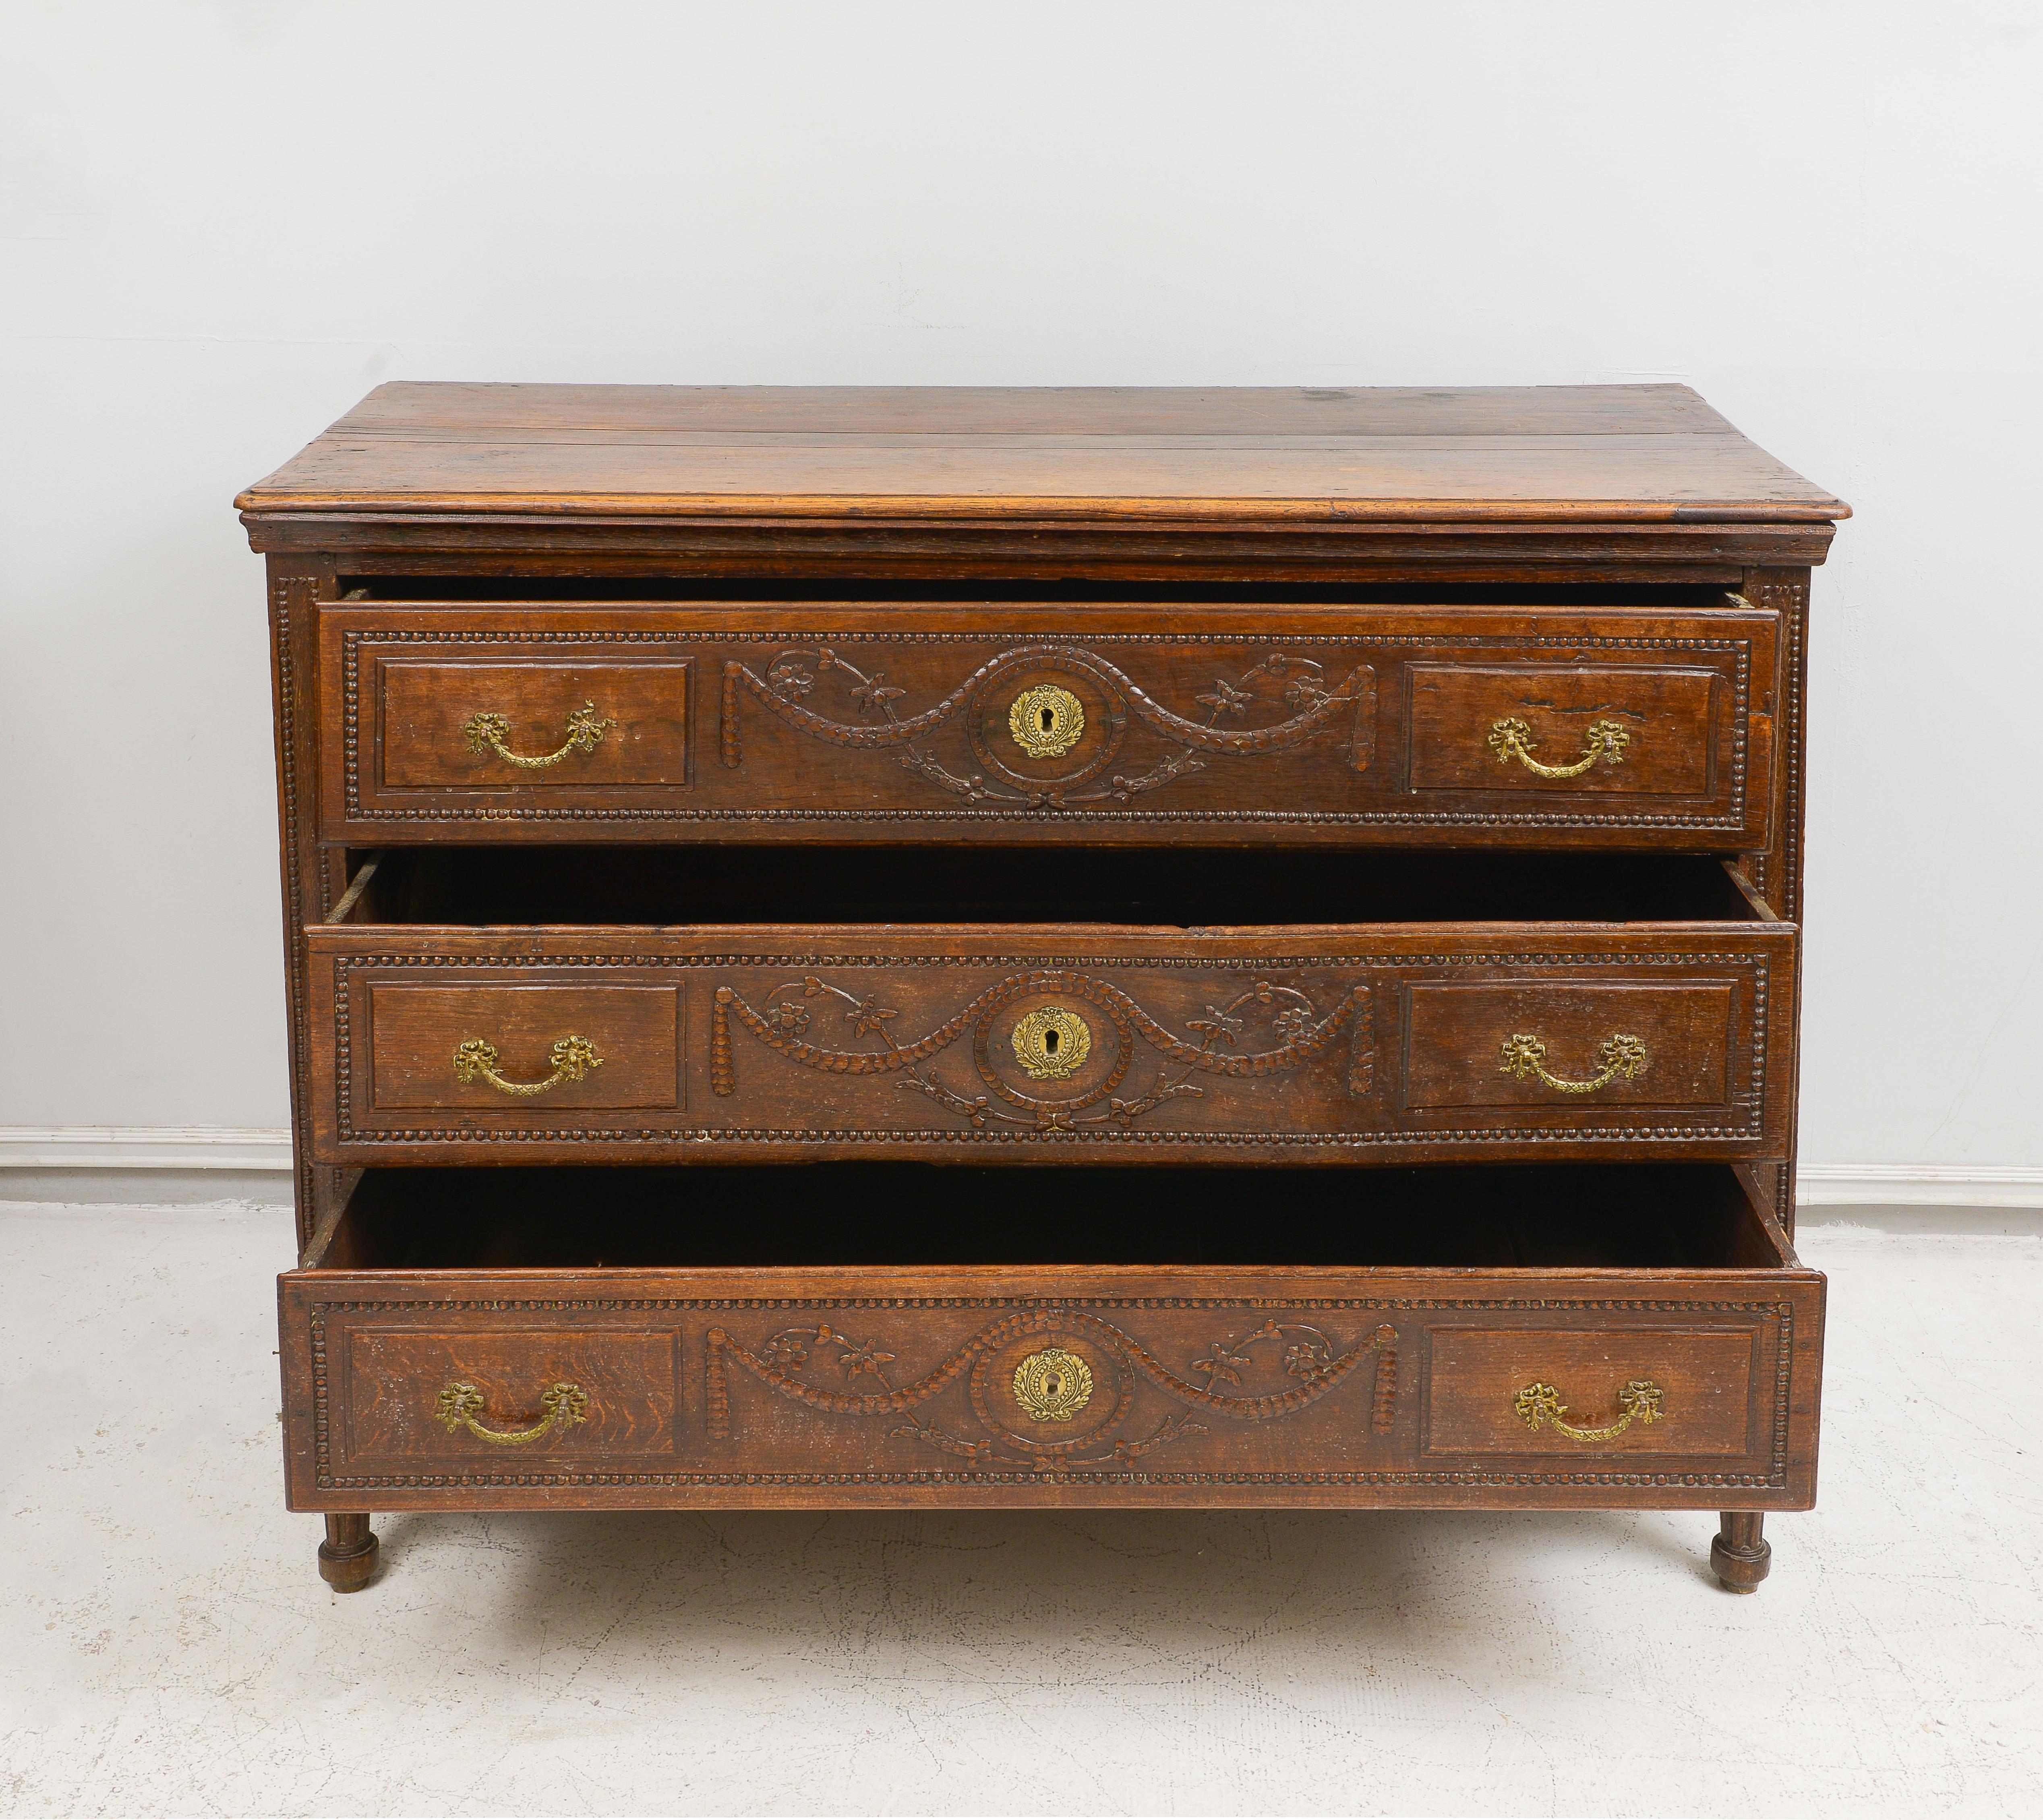 19th Century French Antique Chest of Drawers/ Commode with Hand-Carved Swags